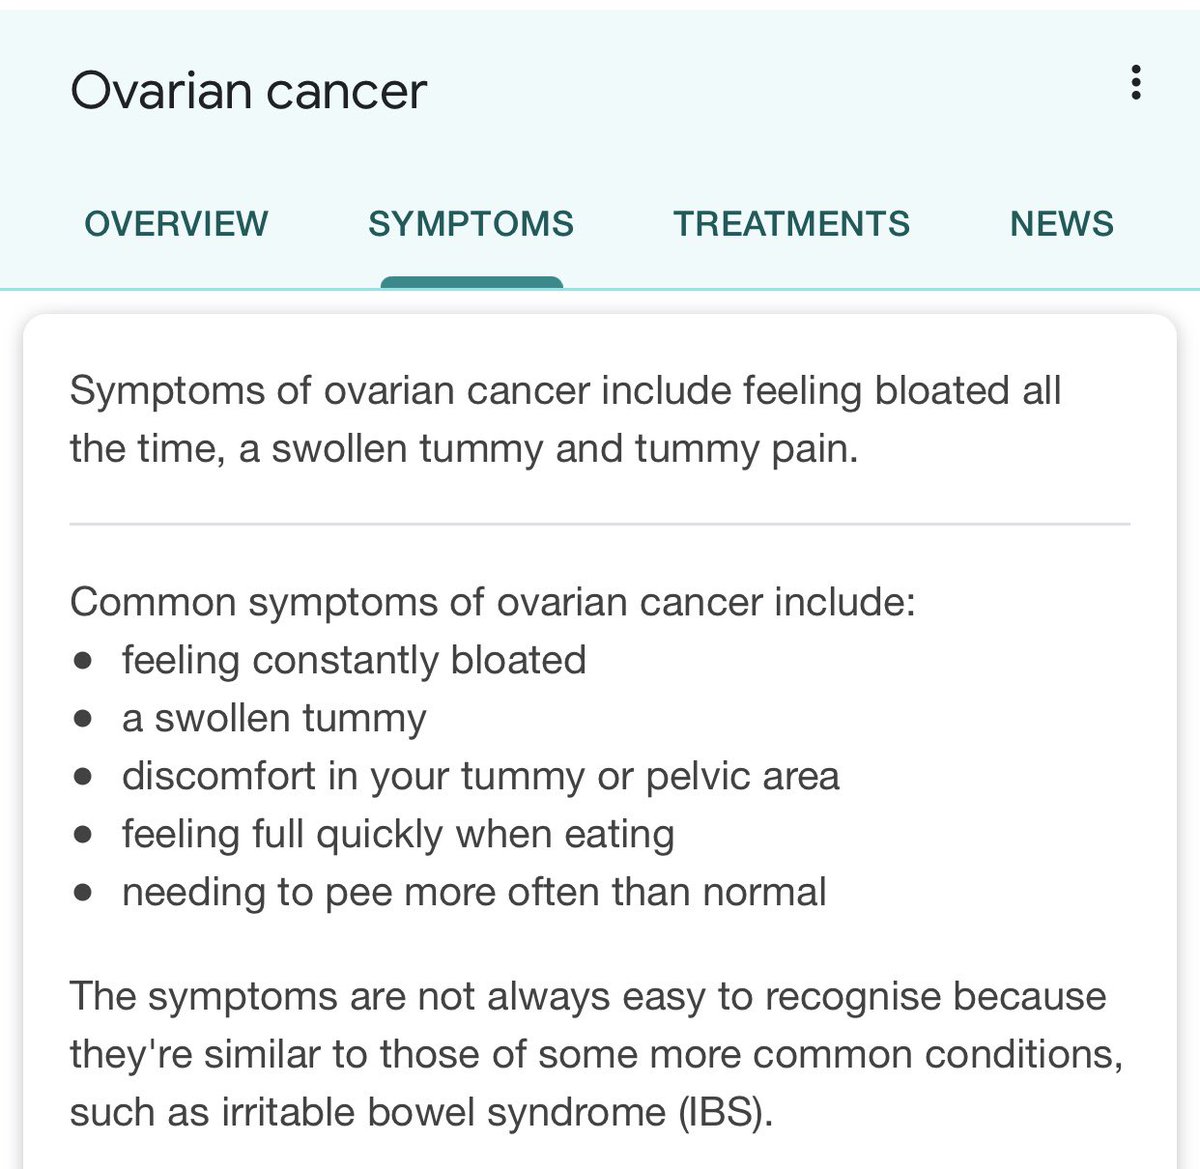 If you are female you are not routinely screened for Ovarian cancer. I didn’t understand the symptoms and neither did my mate. She’s not here any more. The symptoms are easily dismissed as irritable bowel. Knowing our female bodies is crucial. Knowing our bodies are female. Same.